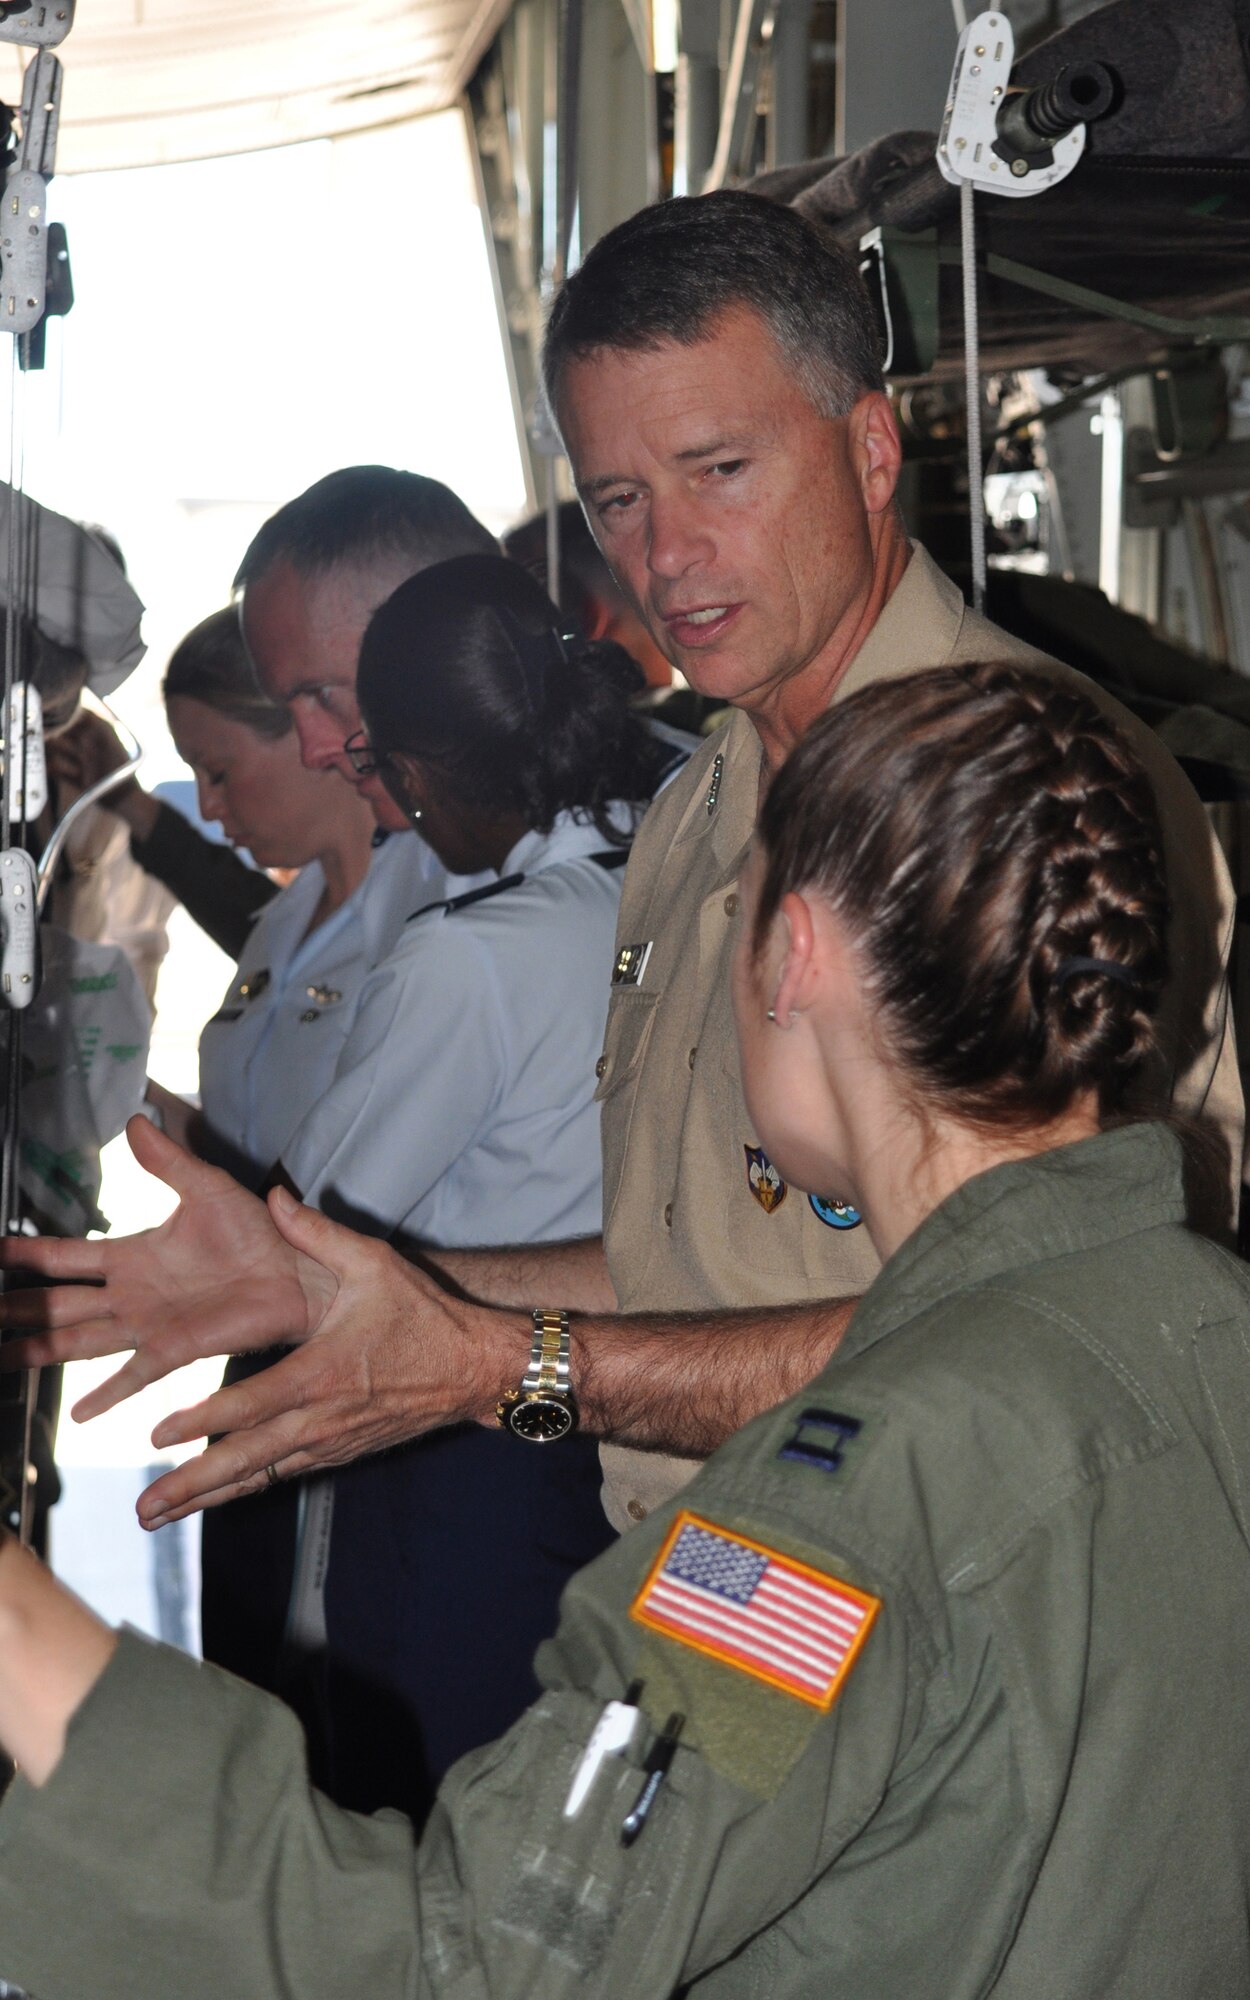 Navy Adm. James A. Winnefeld, Jr., discusses the challenges of aeromedical evacuation with Capt. Carrie Williamson (foreground) July 26 at Peterson Air Force Base, Colo. Admiral Winnefeld, commander of both the North American Aerospace Defense Command and U.S. Northern Command, together with senior leaders from both commands, visited the Air Force Reserve’s 302nd Airlift Wing to gain a better understanding of the specialized missions the AF Reserve supports, to include aeromedical evacuation and aerial firefighting. The visit also showcased the capabilities Air Force Reservists can provide to civilian-related missions if called upon. Captain Williamson is flight nurse and Air Reserve Technician within the 302nd AW. (U.S. Air Force photo/Staff Sgt. Stephen J. Collier)